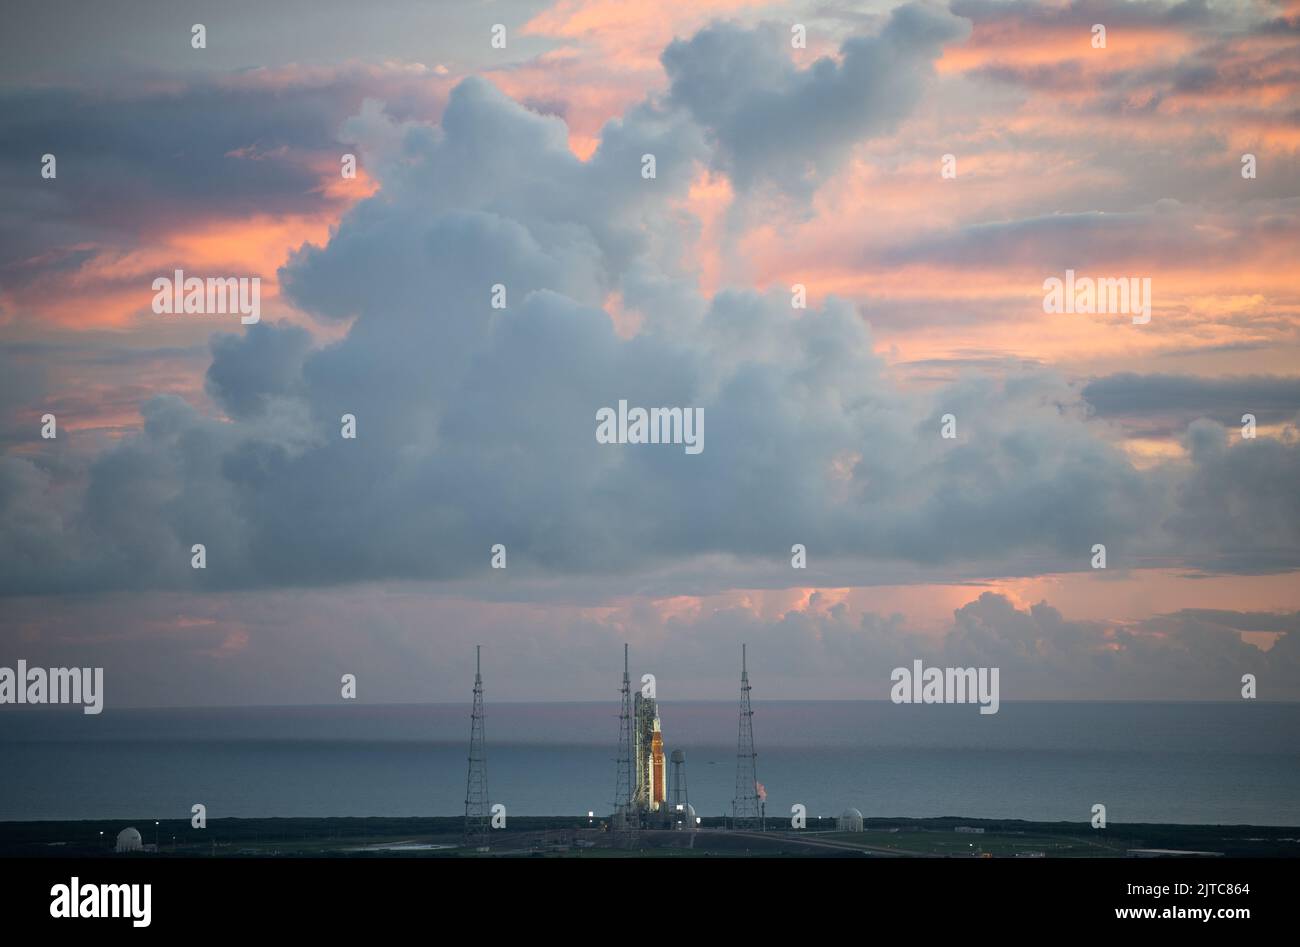 Kennedy Space Center, United States of America. 29 August, 2022. Sunrise breaks over the NASA Space Launch System rocket with the Orion spacecraft during preflight on Launch Complex 39B at the Kennedy Space Center, August 29, 2022, in Cape Canaveral, Florida. The countdown for the un-crewed flight test was halted after a problem with the fuel system caused an extended delay. Credit: Joel Kowsky/NASA/Alamy Live News Stock Photo